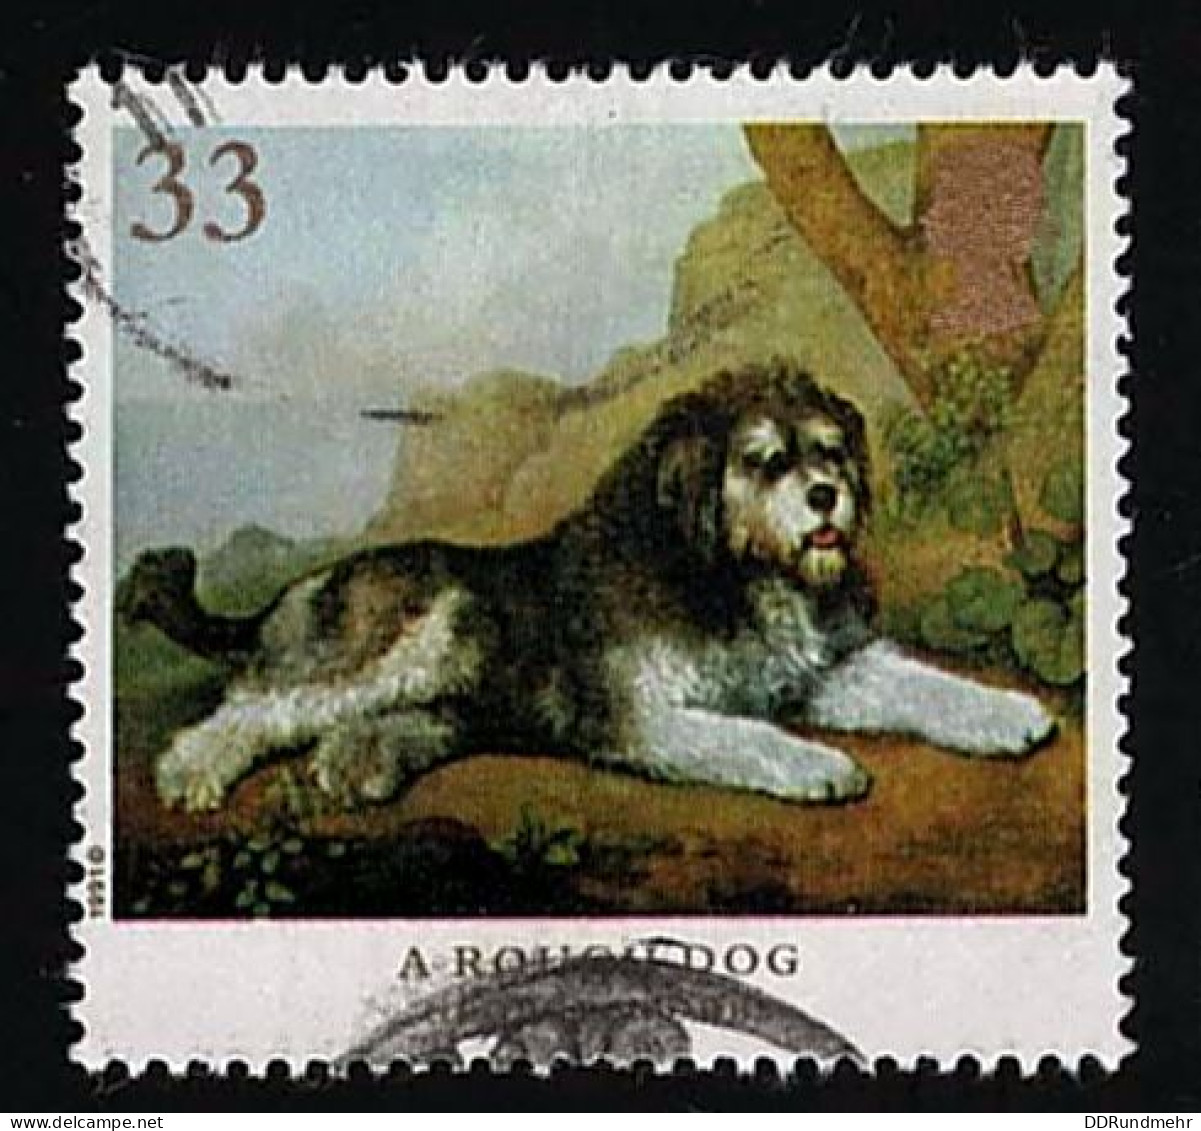 1991 Dogs  Michel GB 1308 Stamp Number GB 1348 Yvert Et Tellier GB 1514 Stanley Gibbons GB 1534 AFA GB 1445 Used - Oblitérés